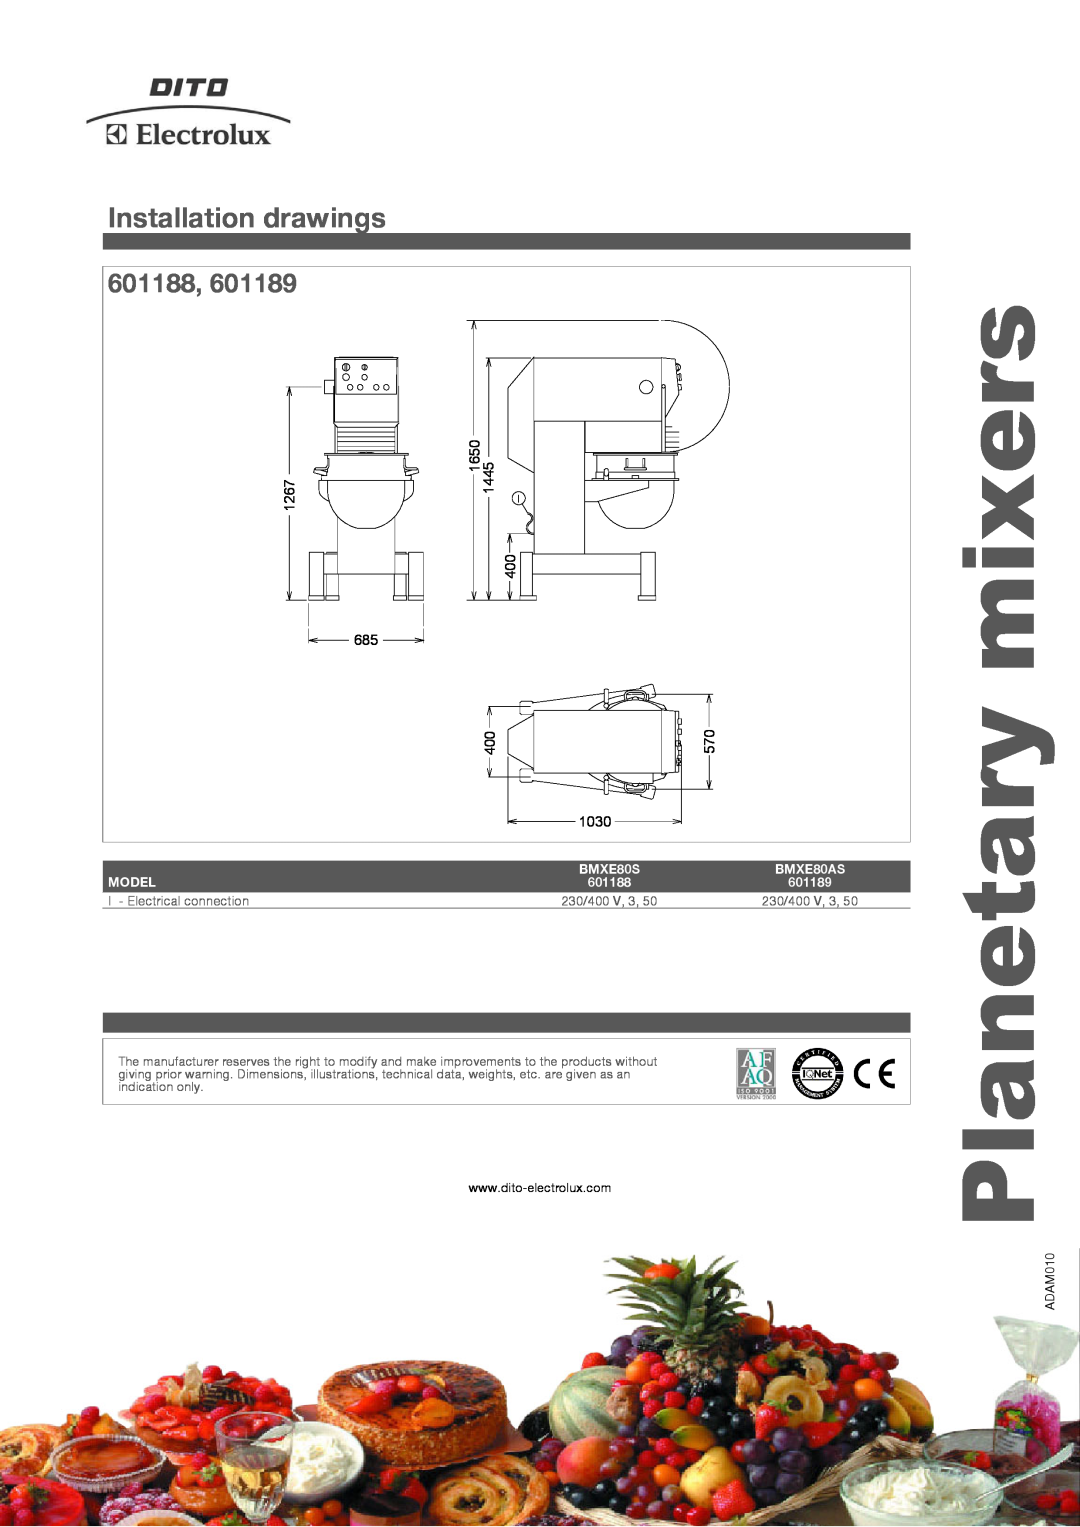 Electrolux manual Installation drawings, 601188, mixers, Planetary, 1267, 1650, 1030, Model, BMXE80S, 601189, BMXE80AS 